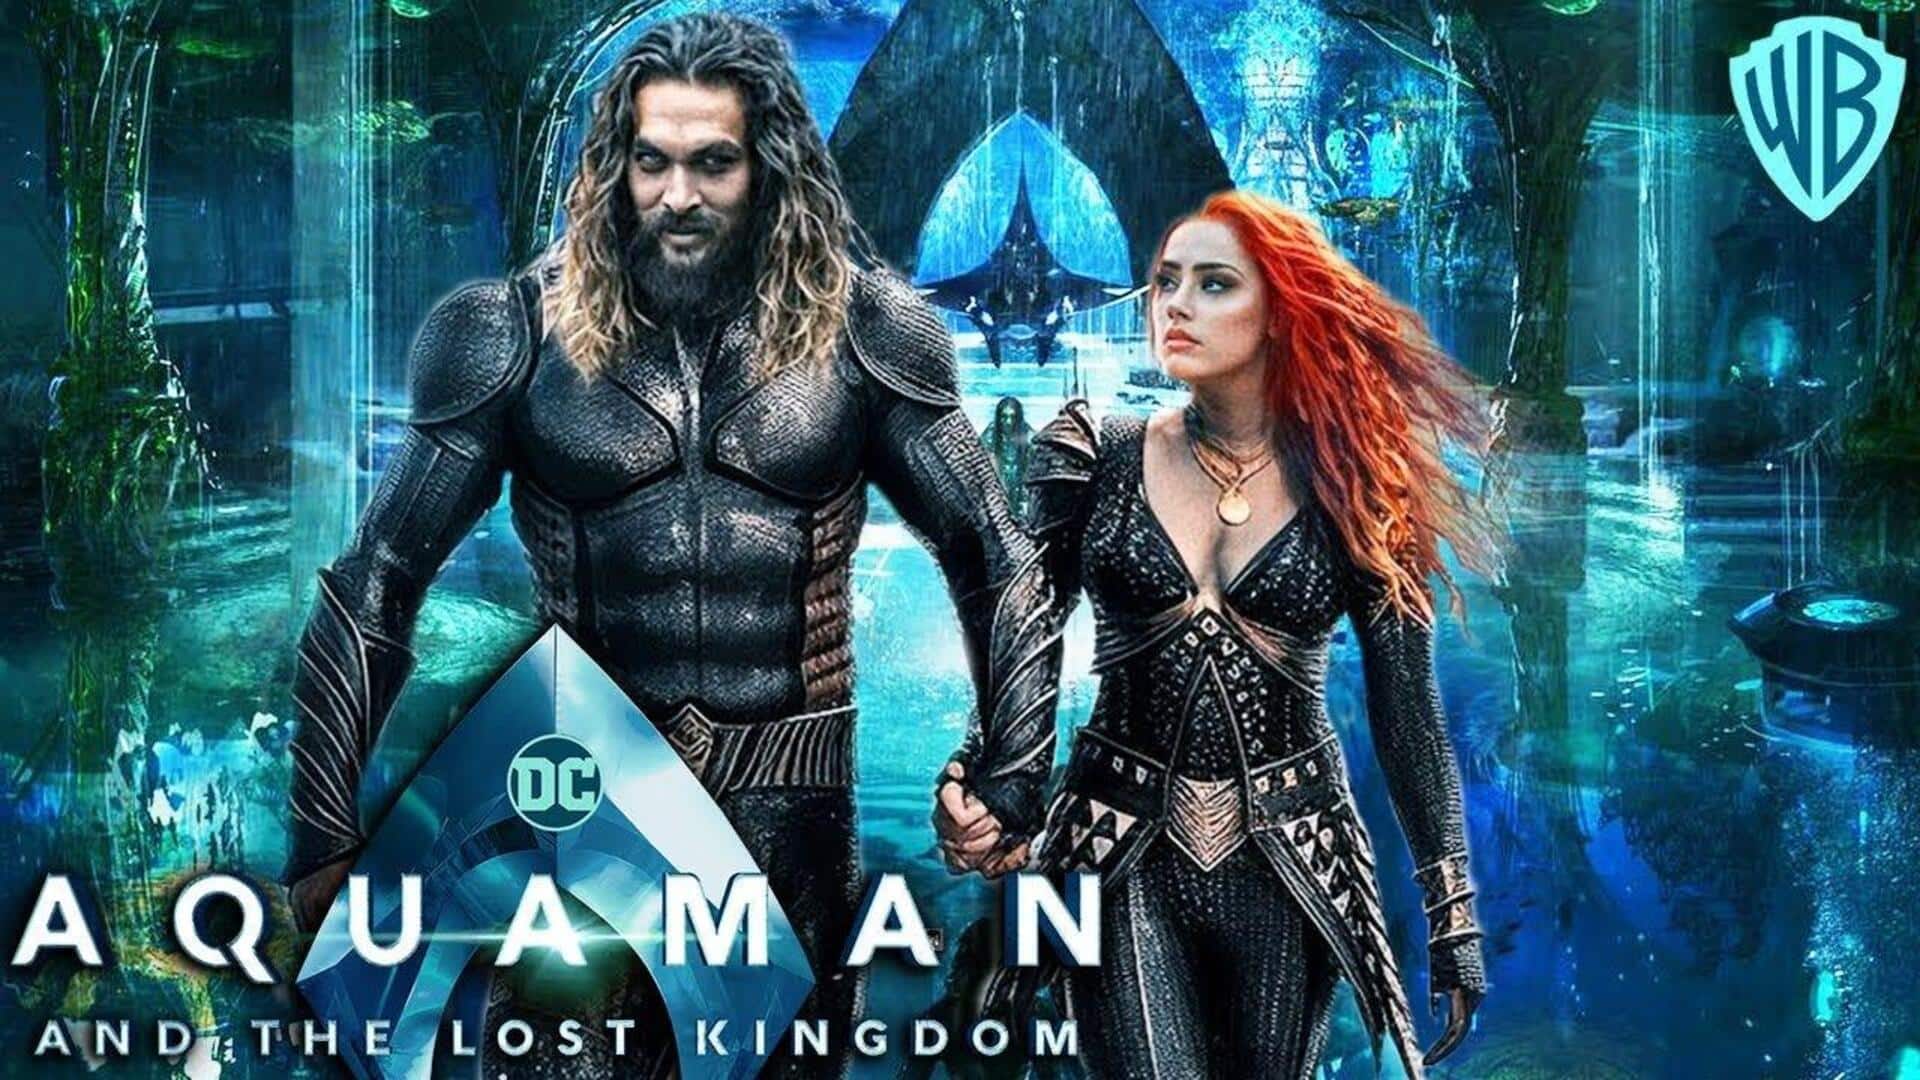 Box office collection: 'Aquaman 2' sees decent weekend in India